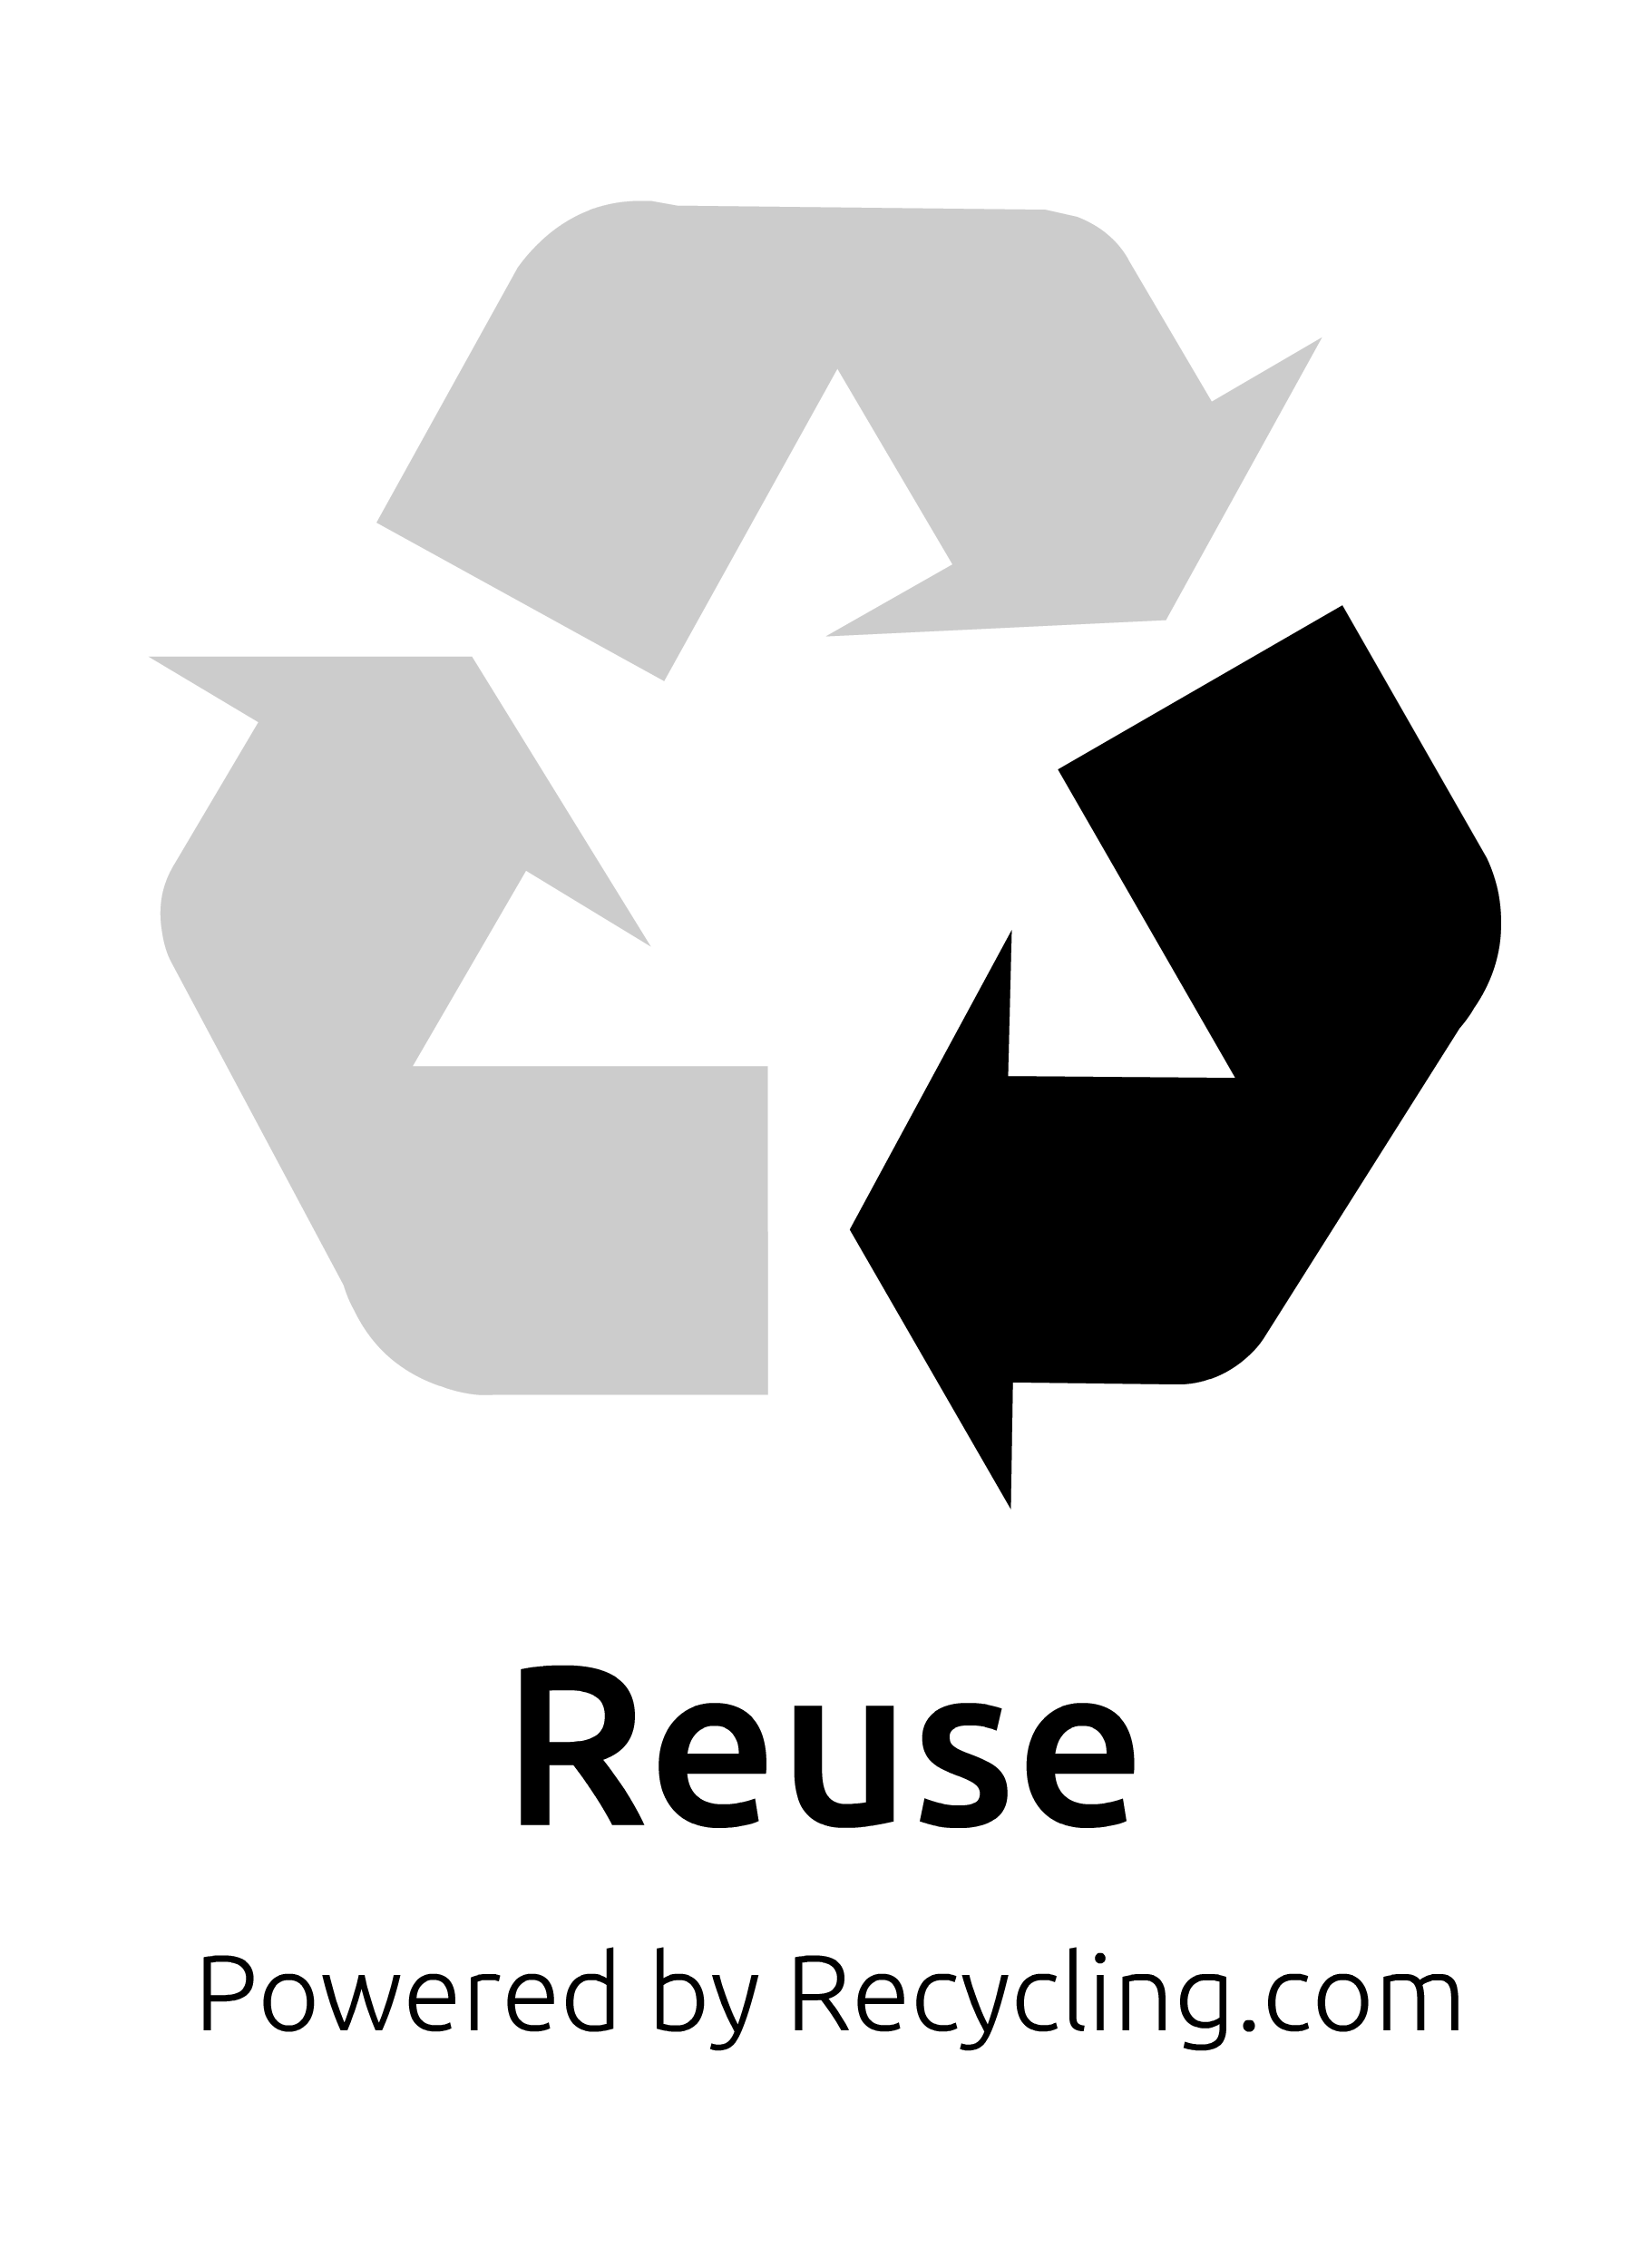 Black and White Recycle Logo - The Recycling Trilogy, Reuse, Recycle